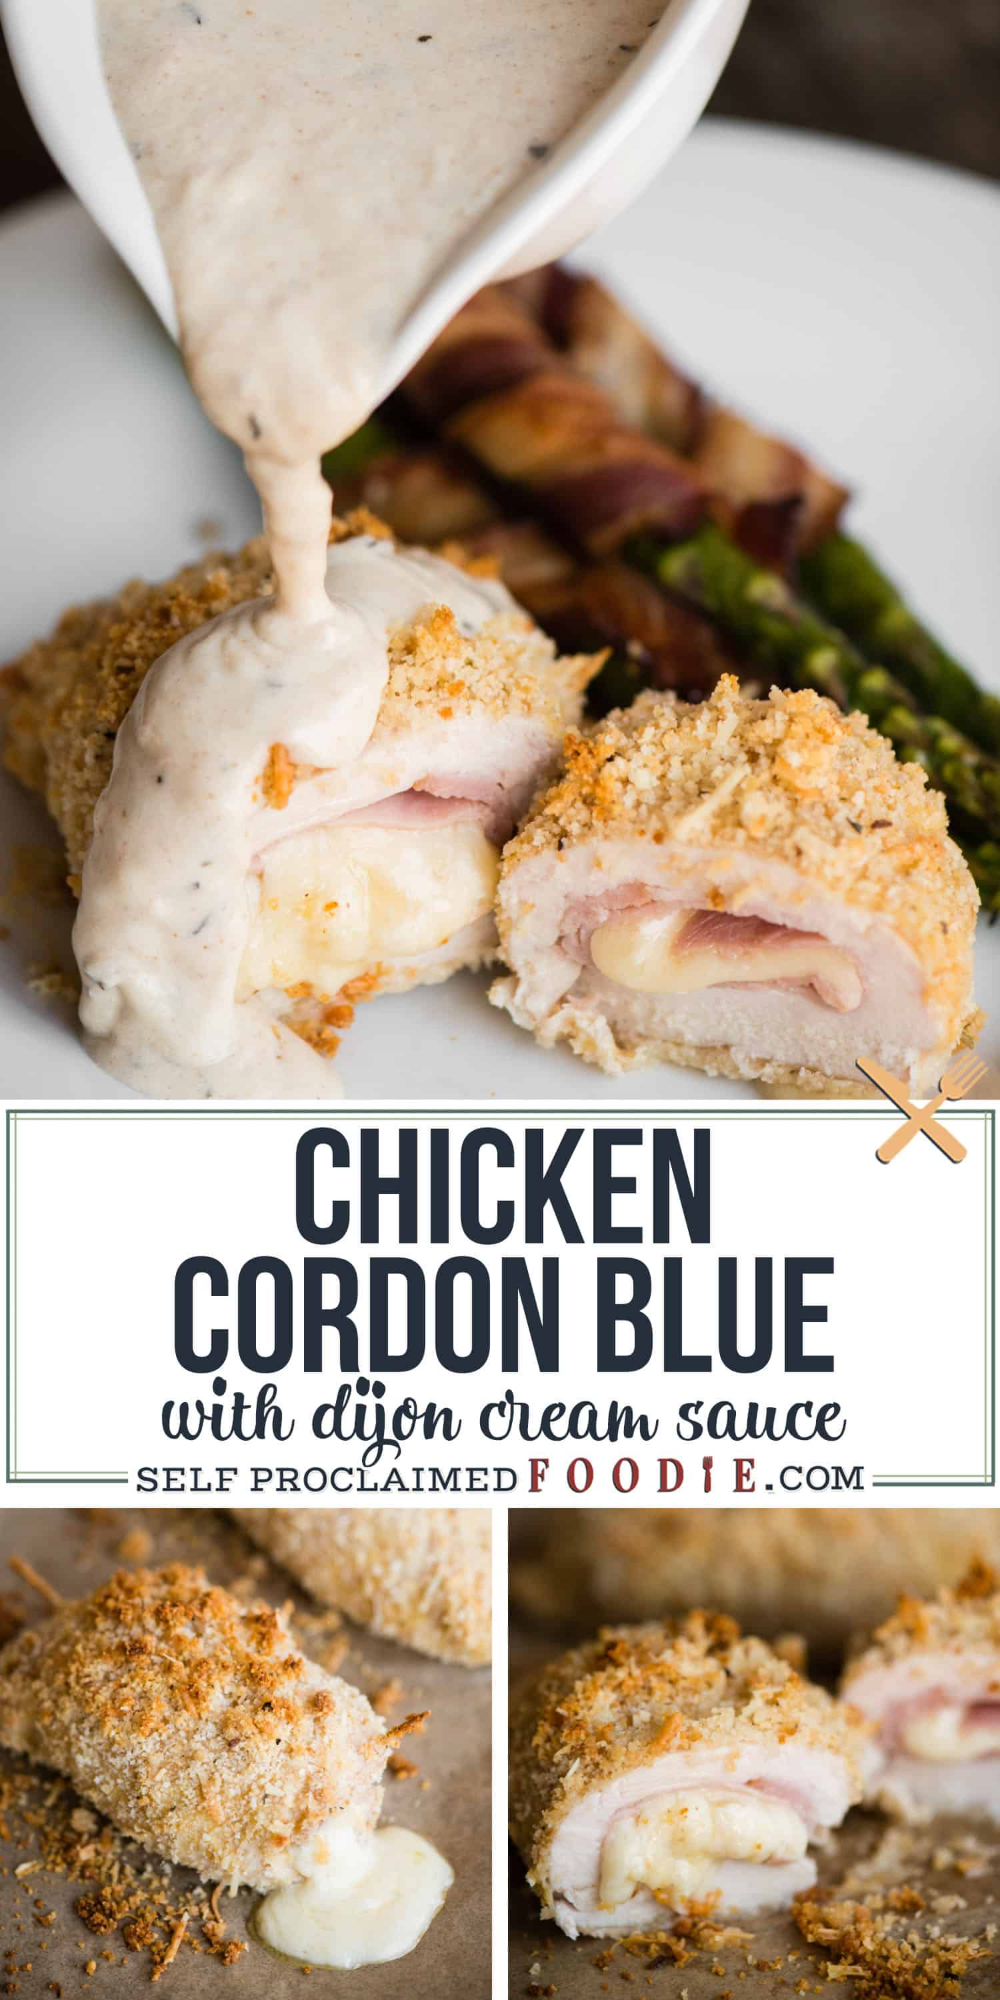 Chicken Cordon Bleu with Dijon Cream Sauce | Self Proclaimed Foodie -   25 dinner recipes for family main dishes chicken breasts ideas